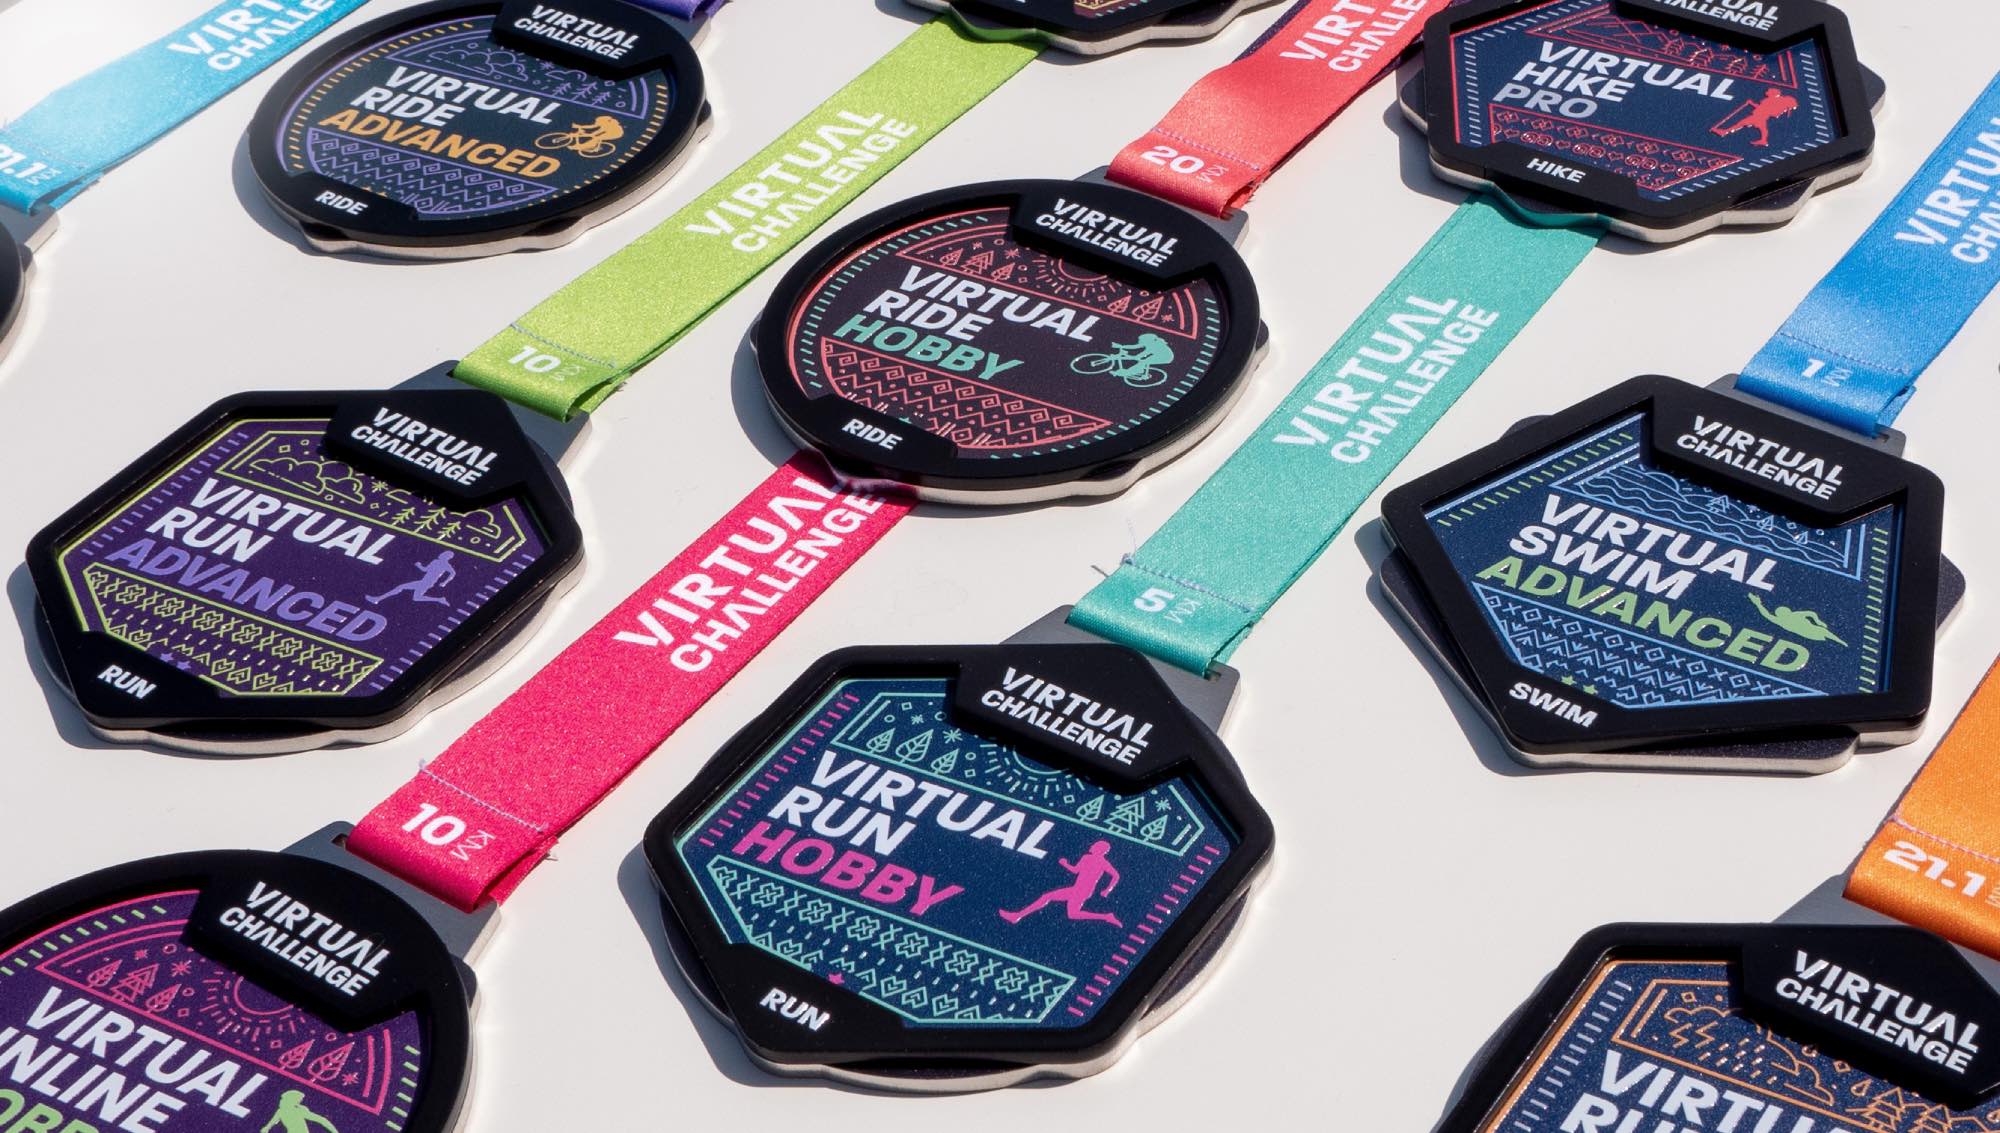 Virtual Challenge medals / finisher medals